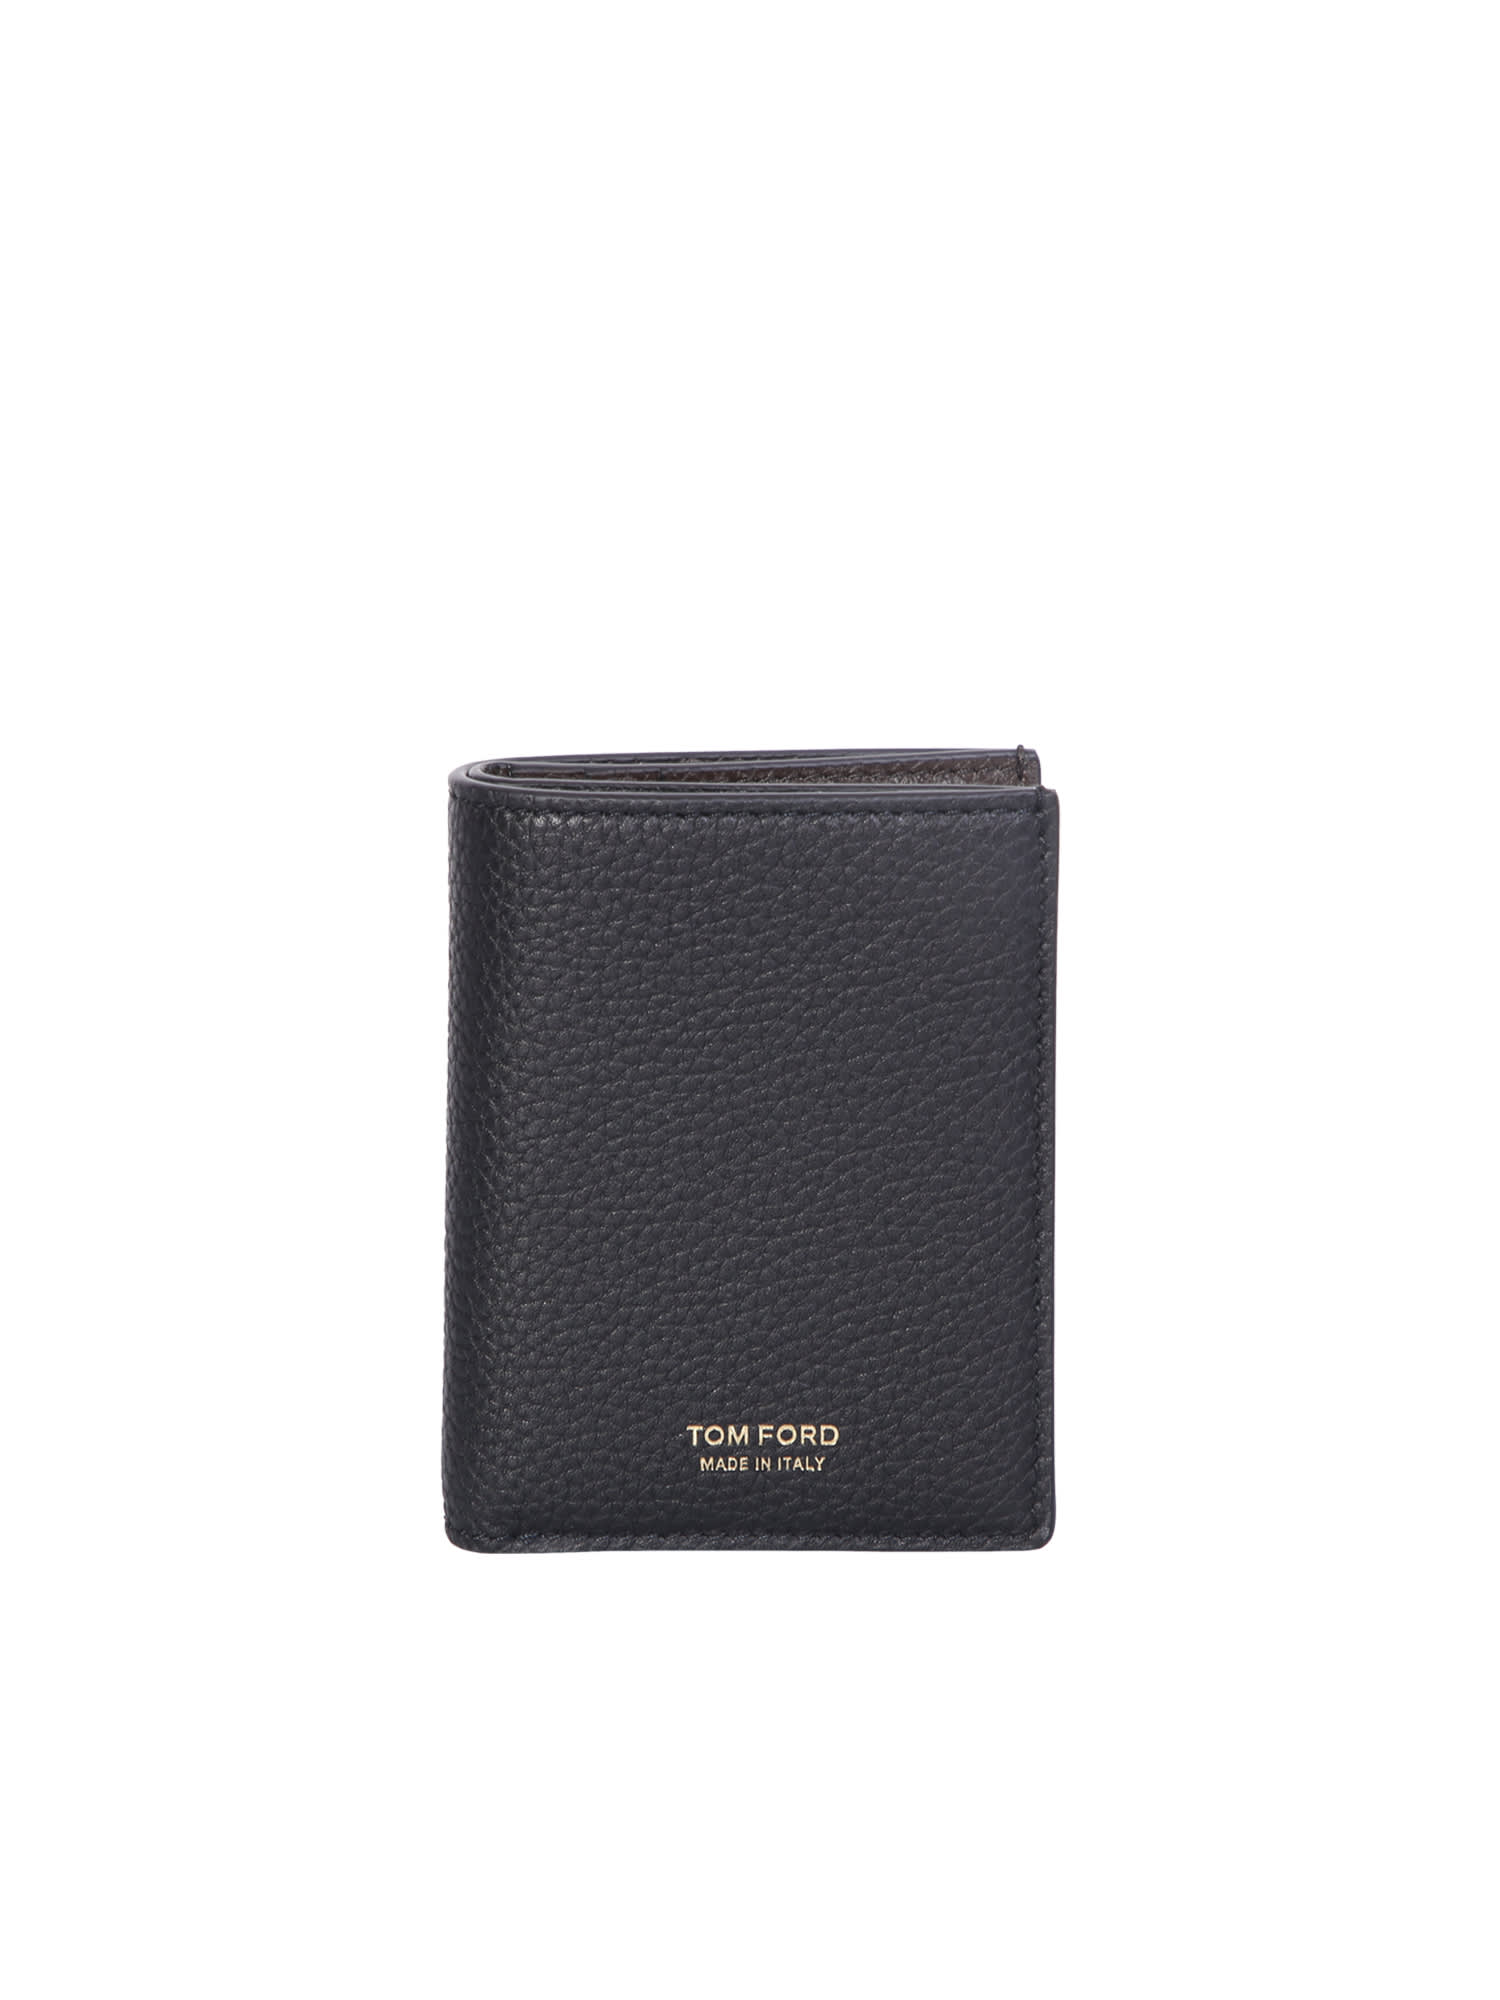 Tom Ford Black Folding Card Holder In Grained Leather